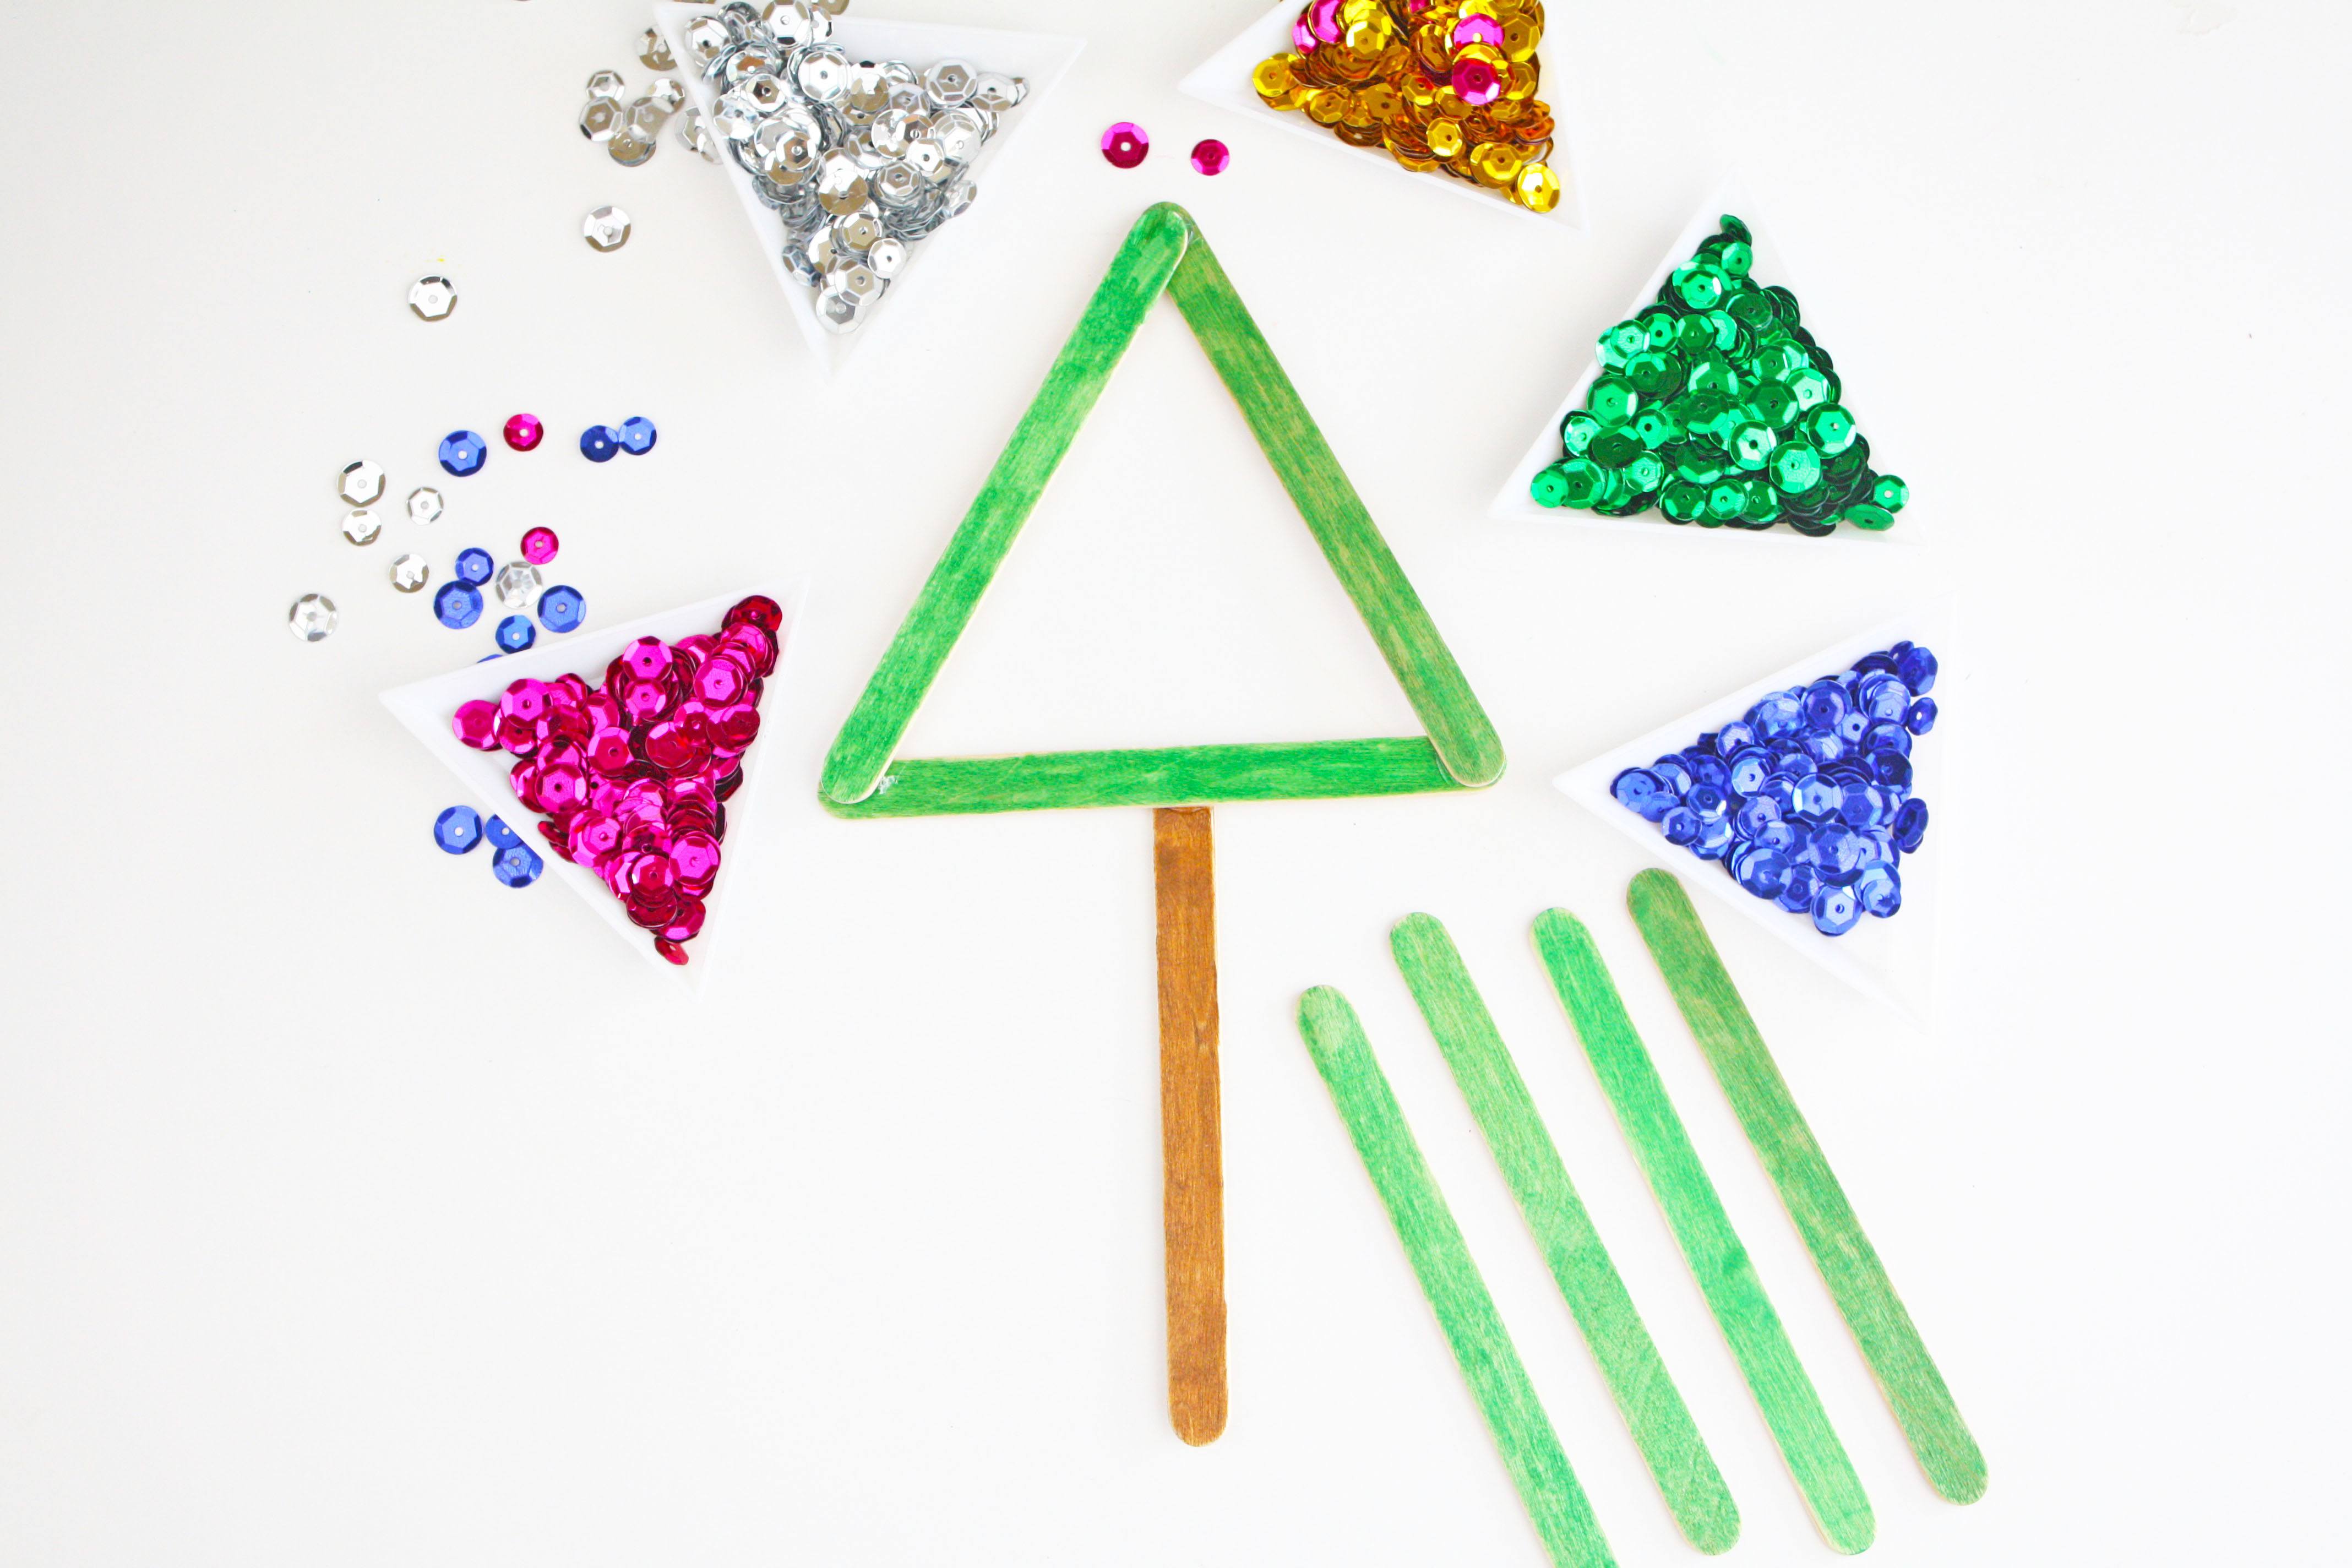 Learn how to make this easy and fun Popsicle Stick Christmas Tree Craft on Love the Day! It's the perfect craft to make with kids this holiday season.